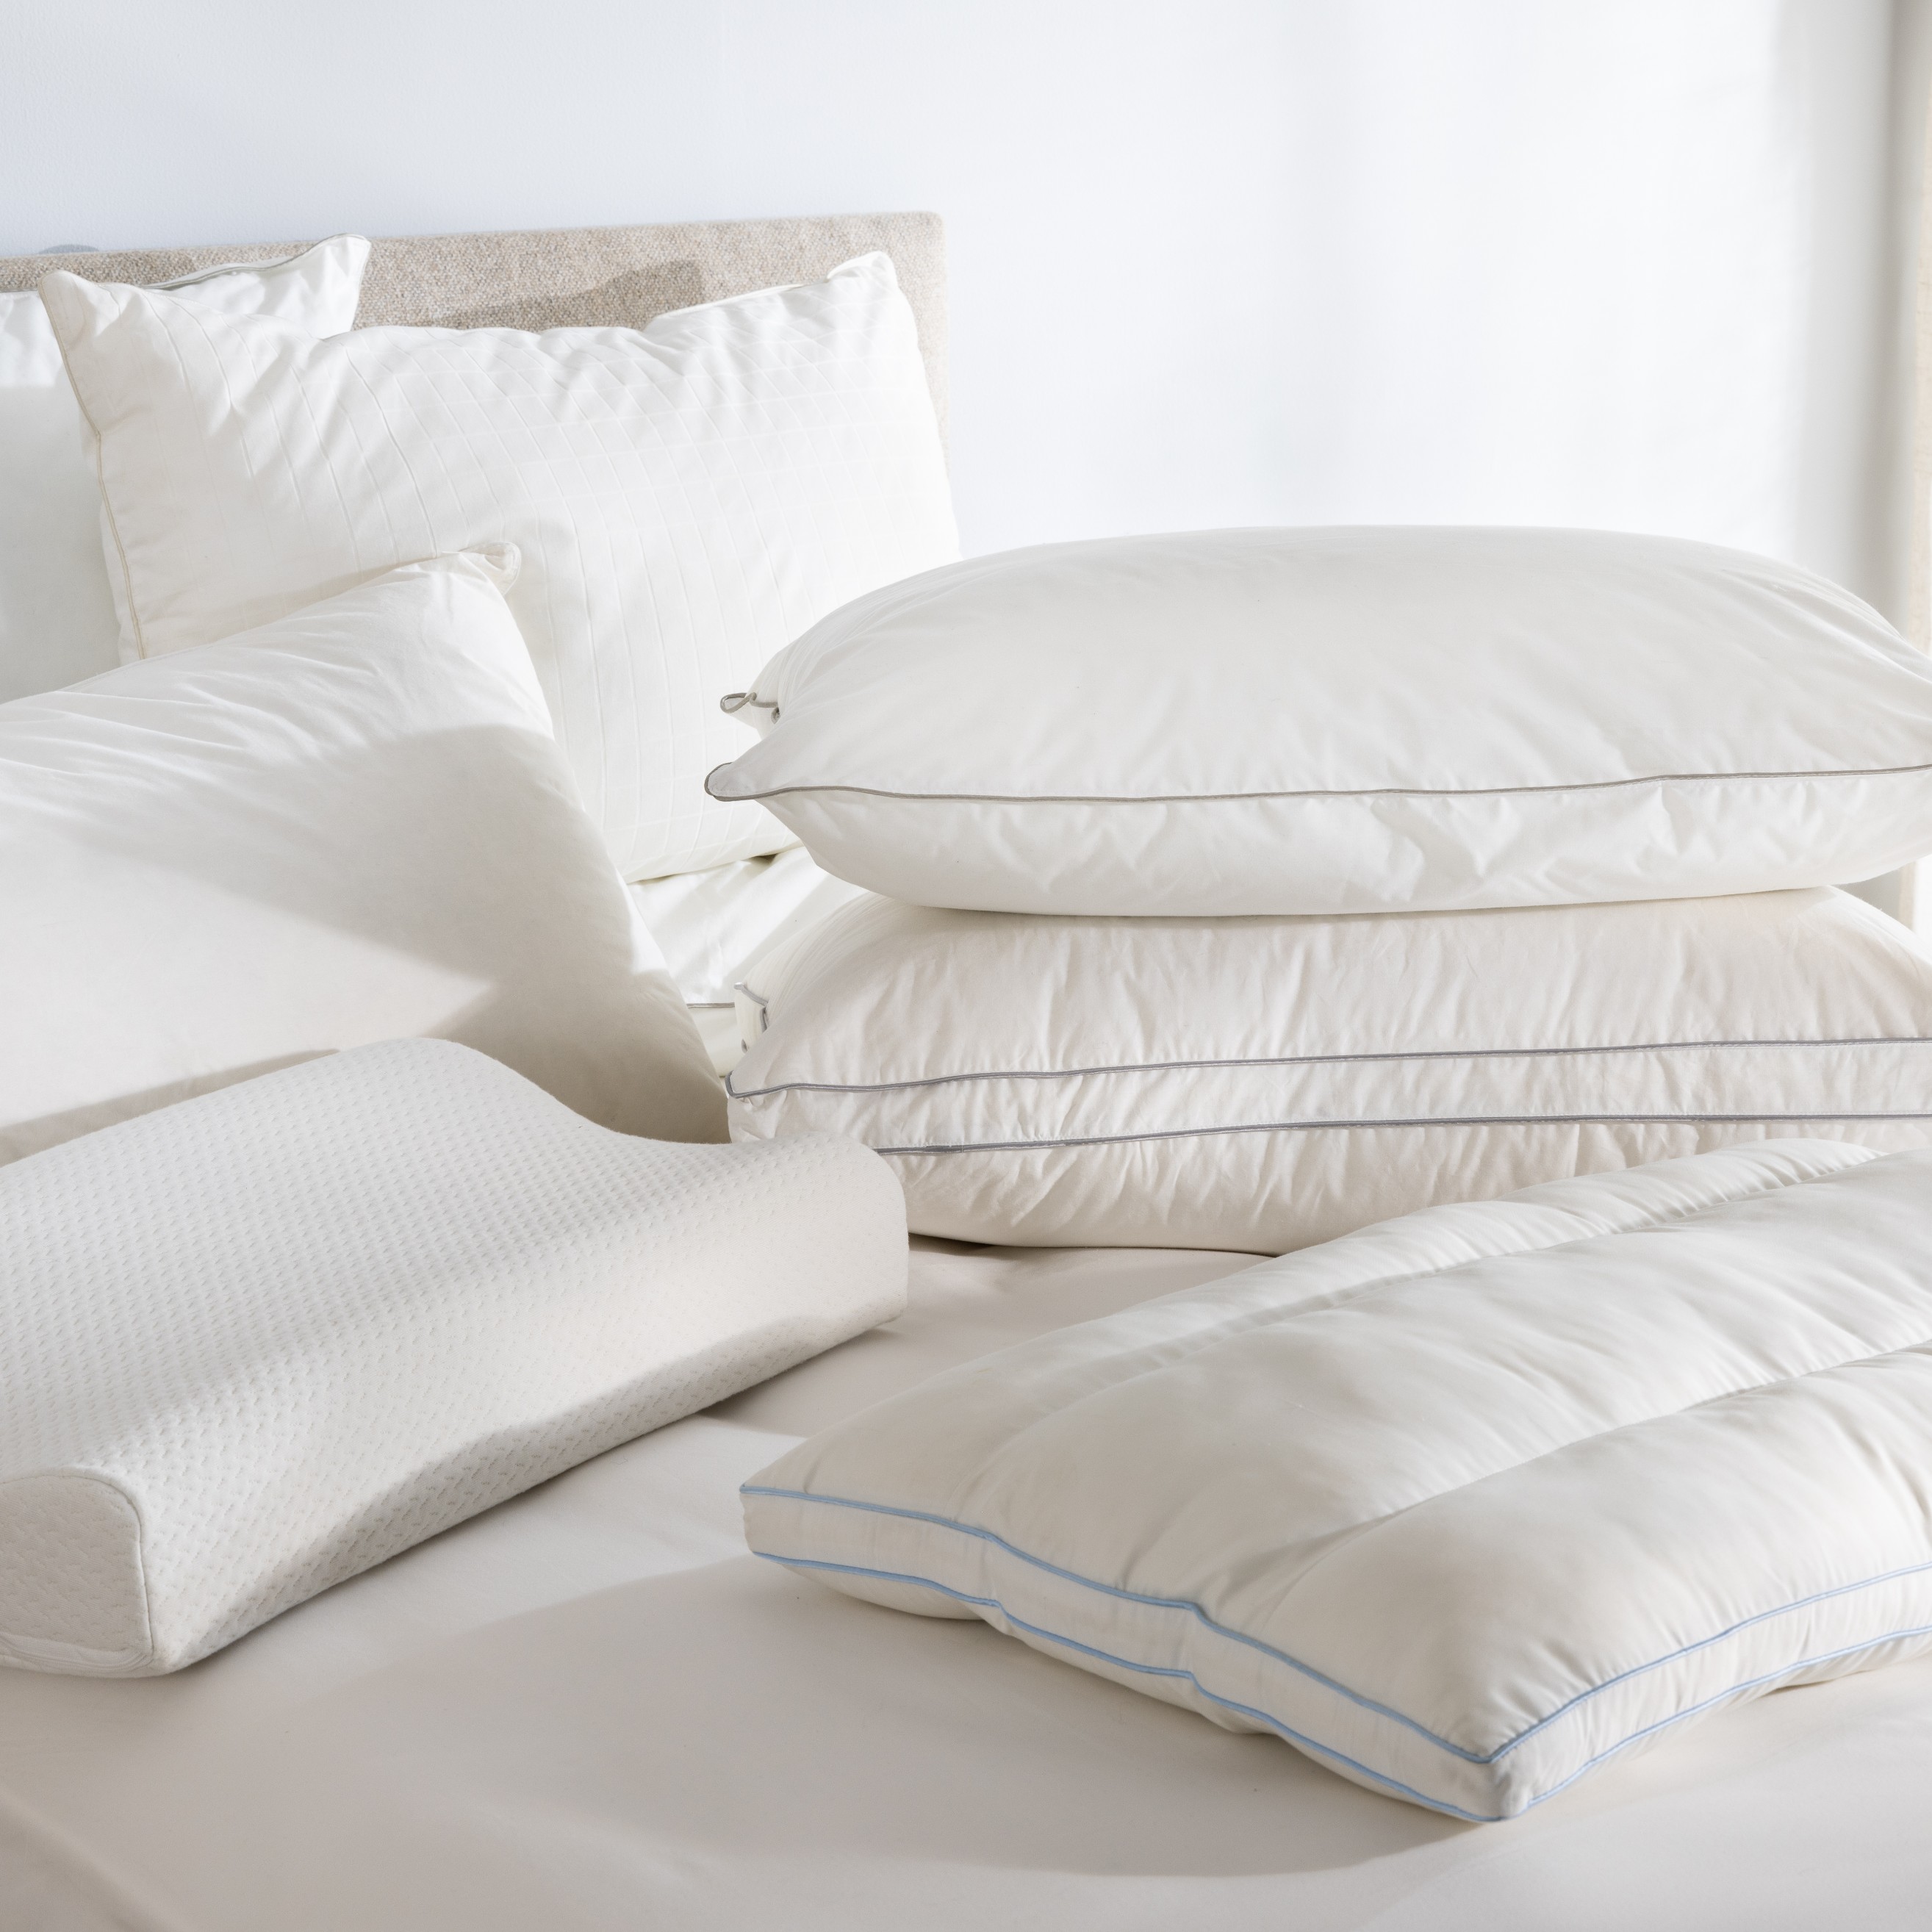 Variation of Soak&Sleep pillows, layered and styled on a bed